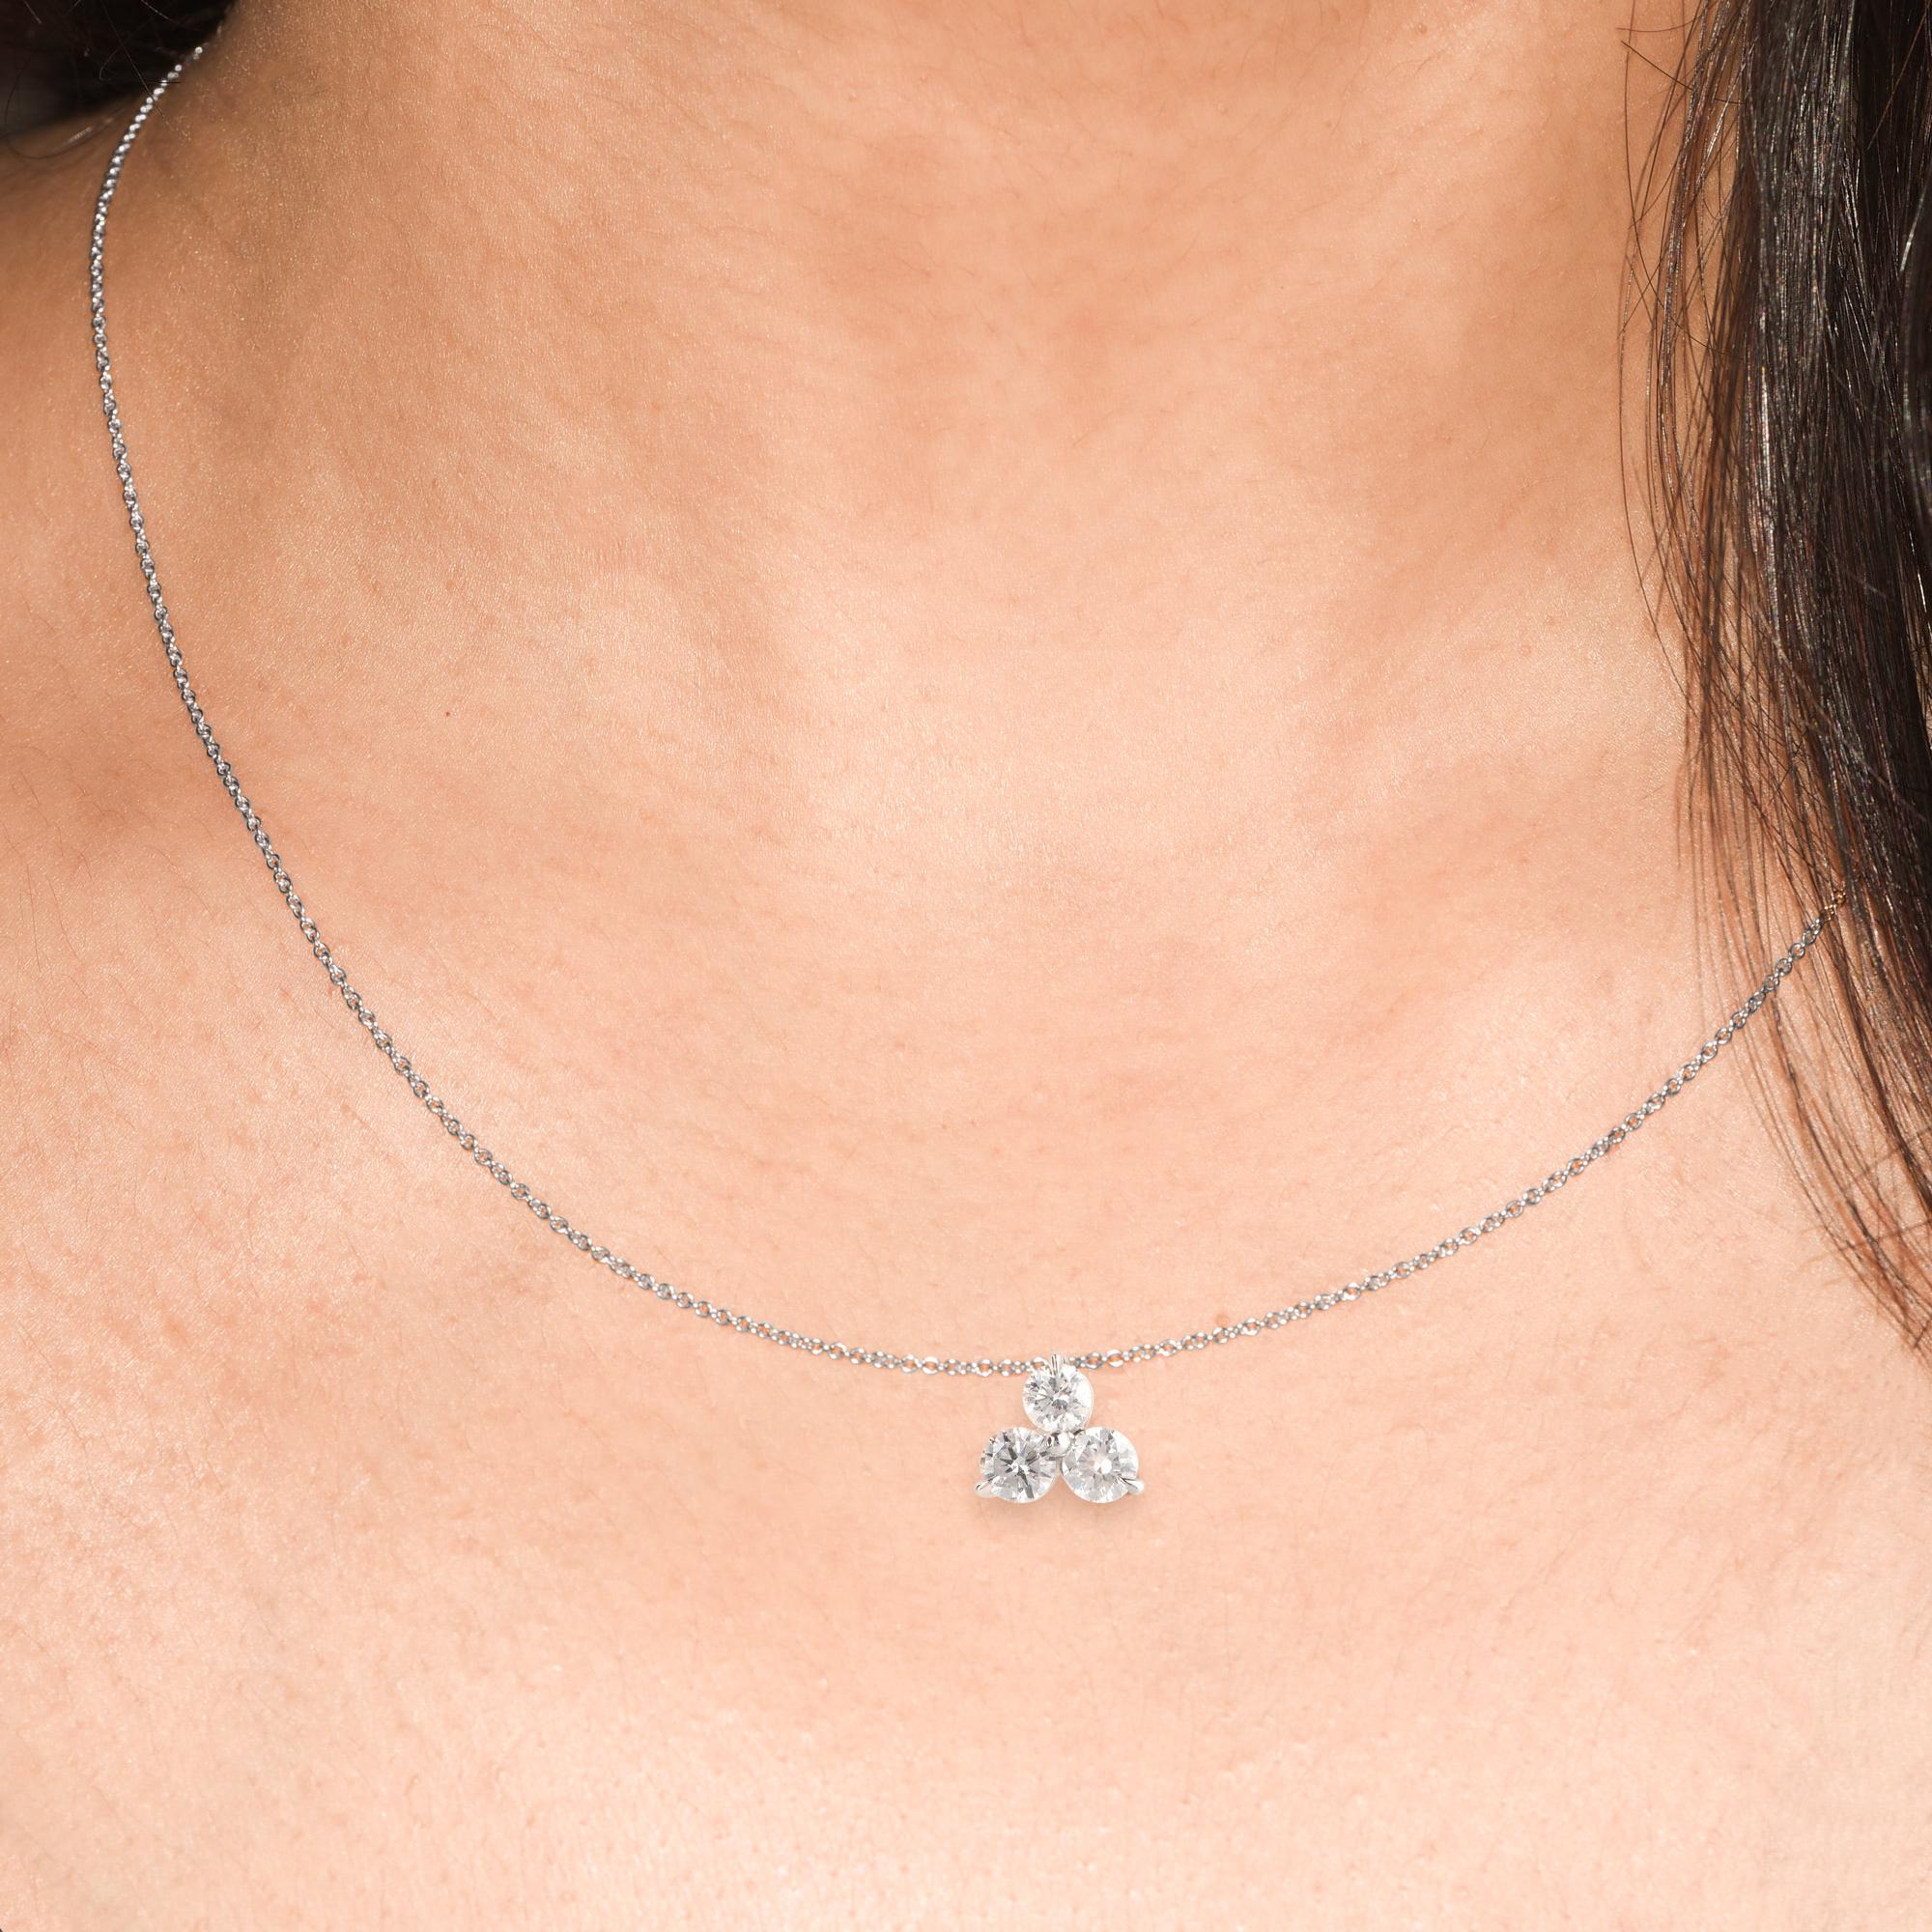 This diamond pendant glitter with 3 brilliant-cut diamonds set in prong setting and handcrafted in 14-karat white gold. The diamonds are graded HI Color, I1 Clarity.  This elegant pendant can be customized in yellow and rose gold on request. 